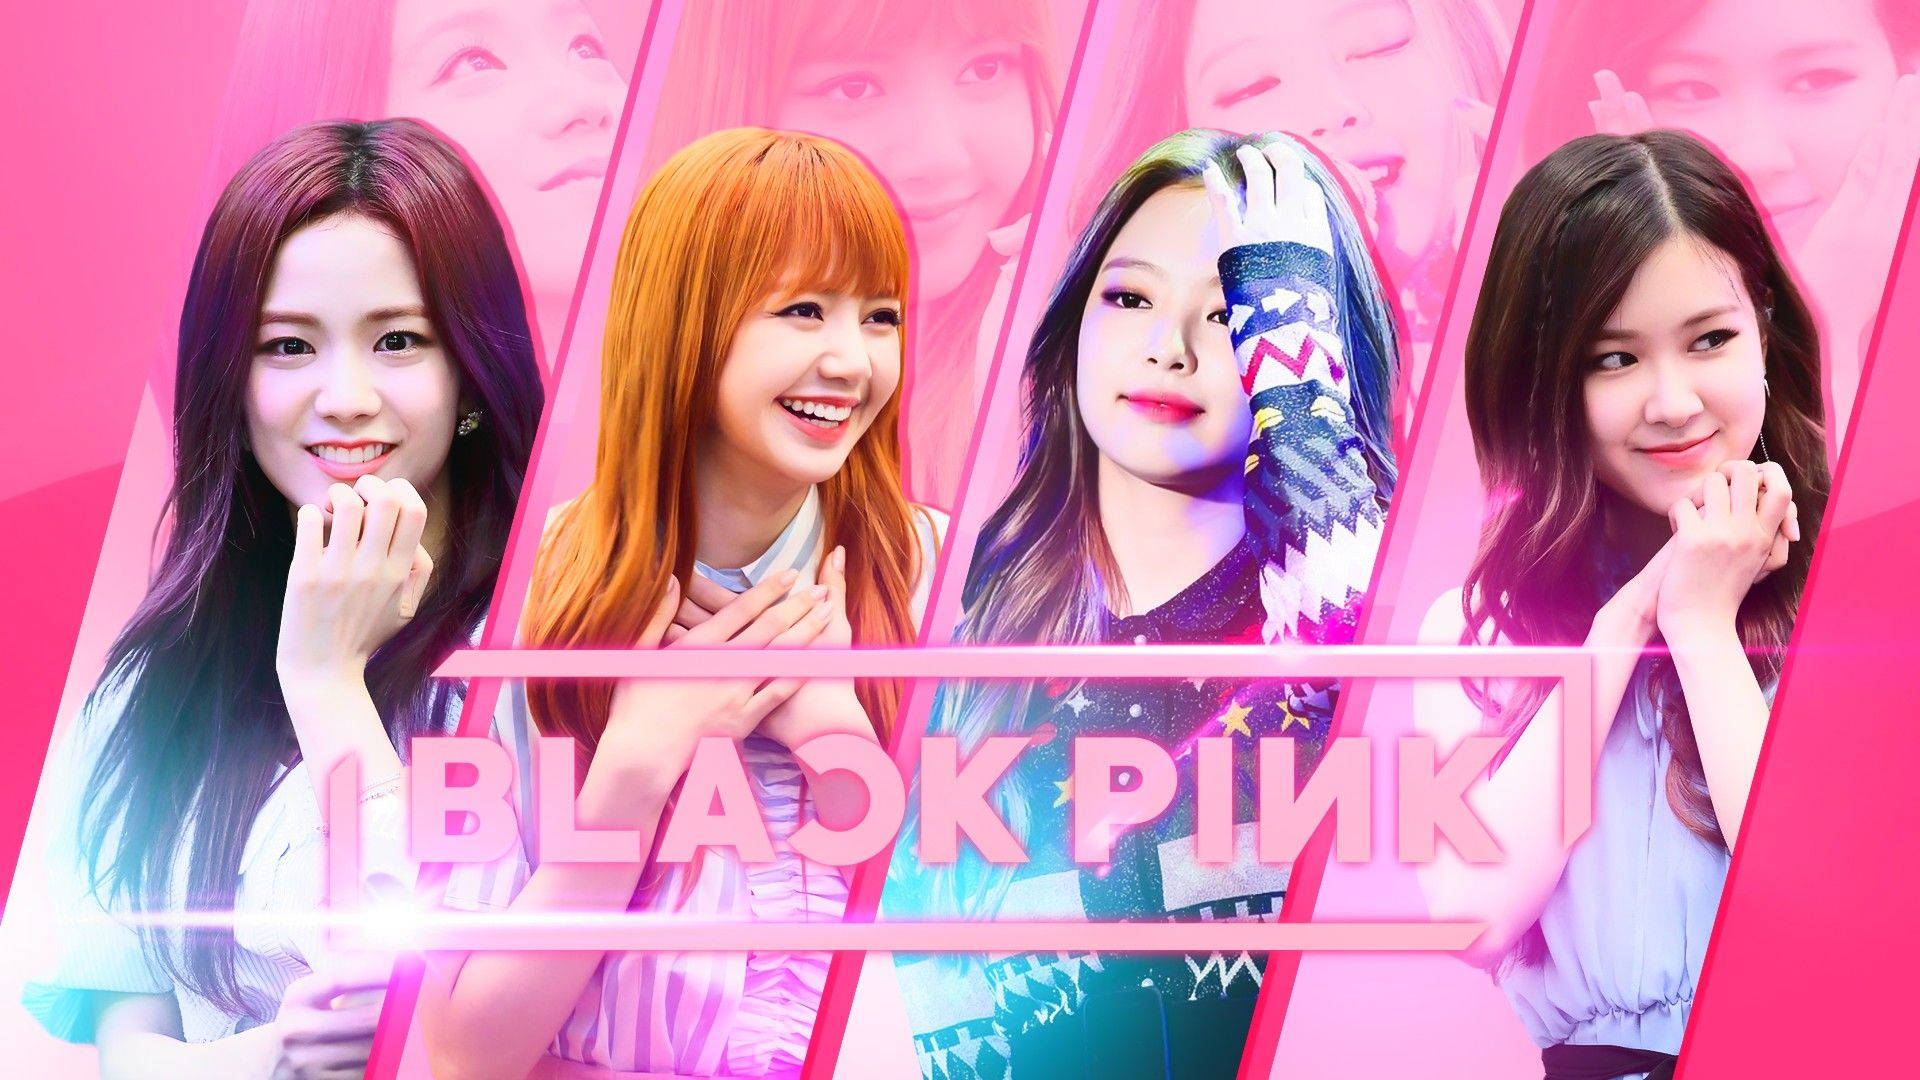 1920X1080 Blackpink Wallpaper and Background